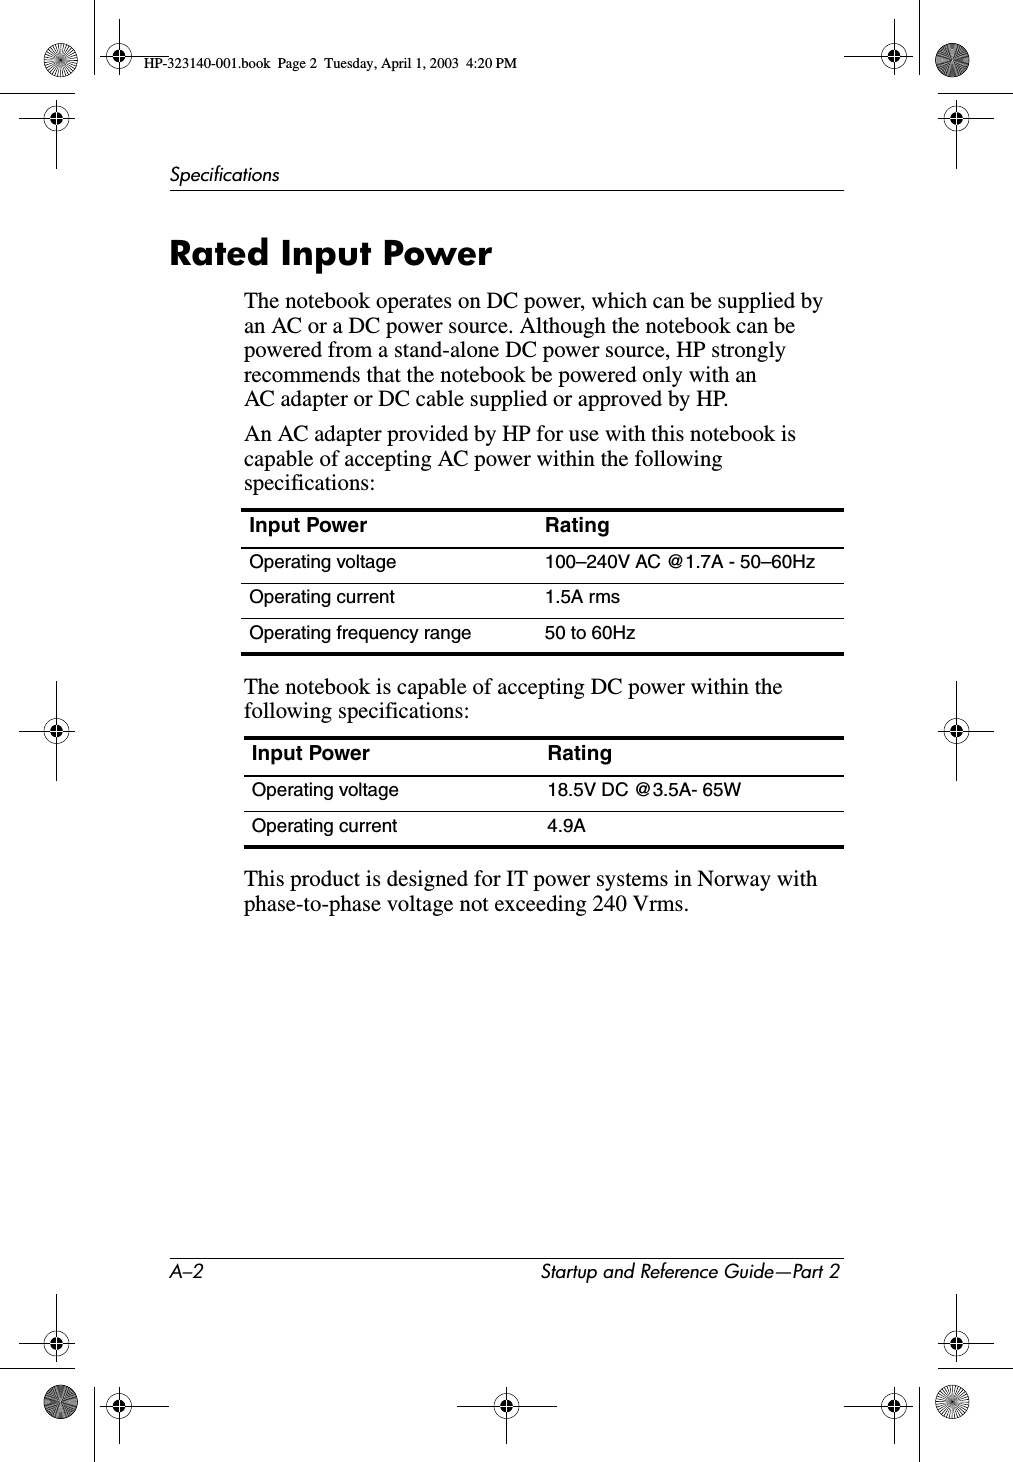 A–2 Startup and Reference Guide—Part 2SpecificationsRated Input PowerThe notebook operates on DC power, which can be supplied by an AC or a DC power source. Although the notebook can be powered from a stand-alone DC power source, HP strongly recommends that the notebook be powered only with an AC adapter or DC cable supplied or approved by HP.An AC adapter provided by HP for use with this notebook is capable of accepting AC power within the following specifications:The notebook is capable of accepting DC power within the following specifications:This product is designed for IT power systems in Norway with phase-to-phase voltage not exceeding 240 Vrms.Input Power RatingOperating voltage 100–240V AC @1.7A - 50–60HzOperating current 1.5A rmsOperating frequency range 50 to 60HzInput Power RatingOperating voltage 18.5V DC @3.5A- 65WOperating current 4.9AHP-323140-001.book  Page 2  Tuesday, April 1, 2003  4:20 PM